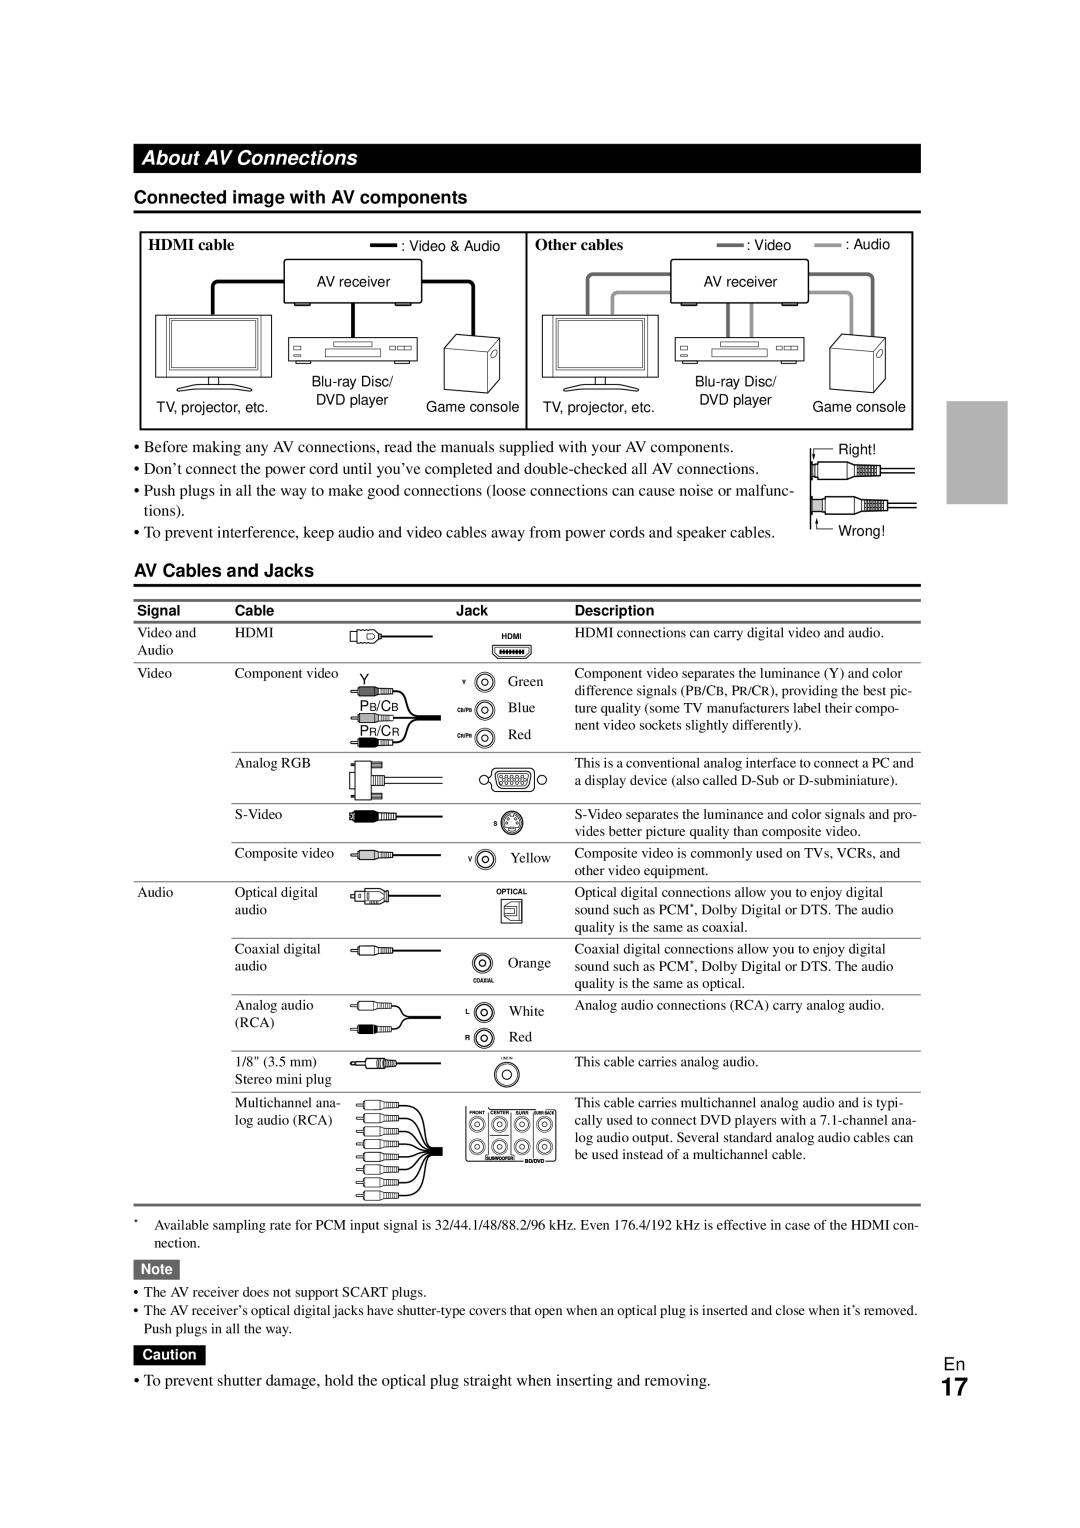 Onkyo HT-RC270 instruction manual About AV Connections, Connected image with AV components, AV Cables and Jacks 